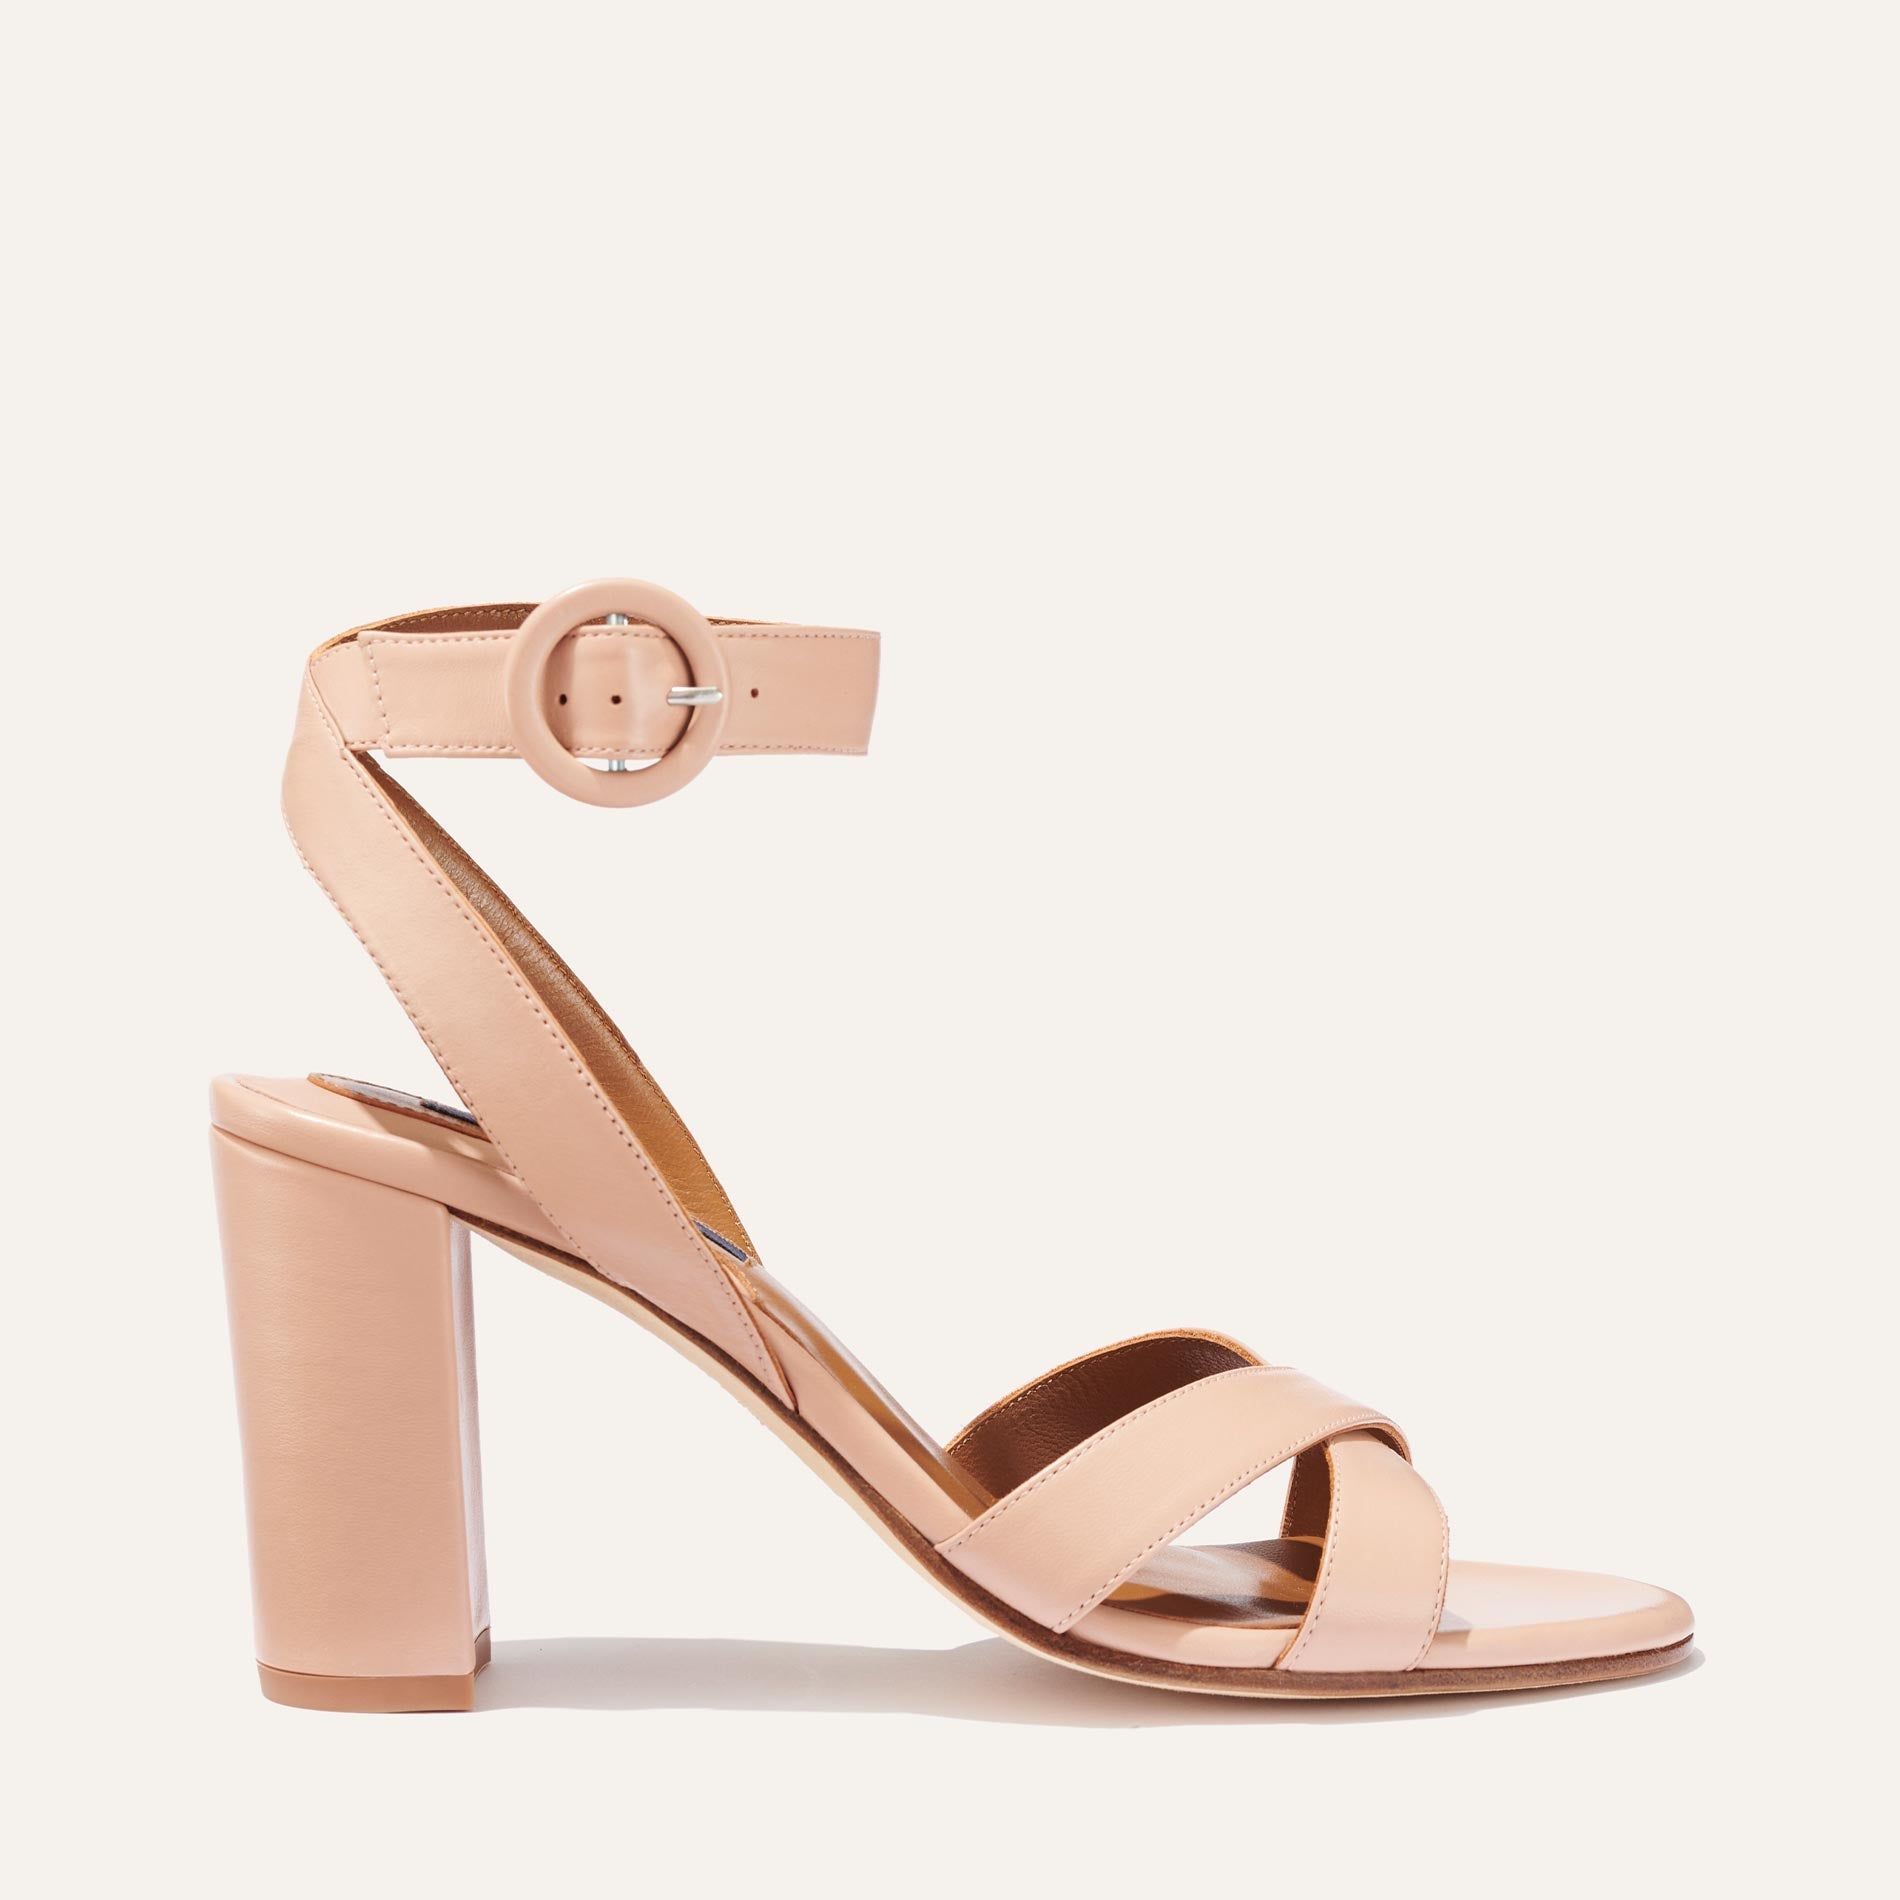 The Uptown Sandal